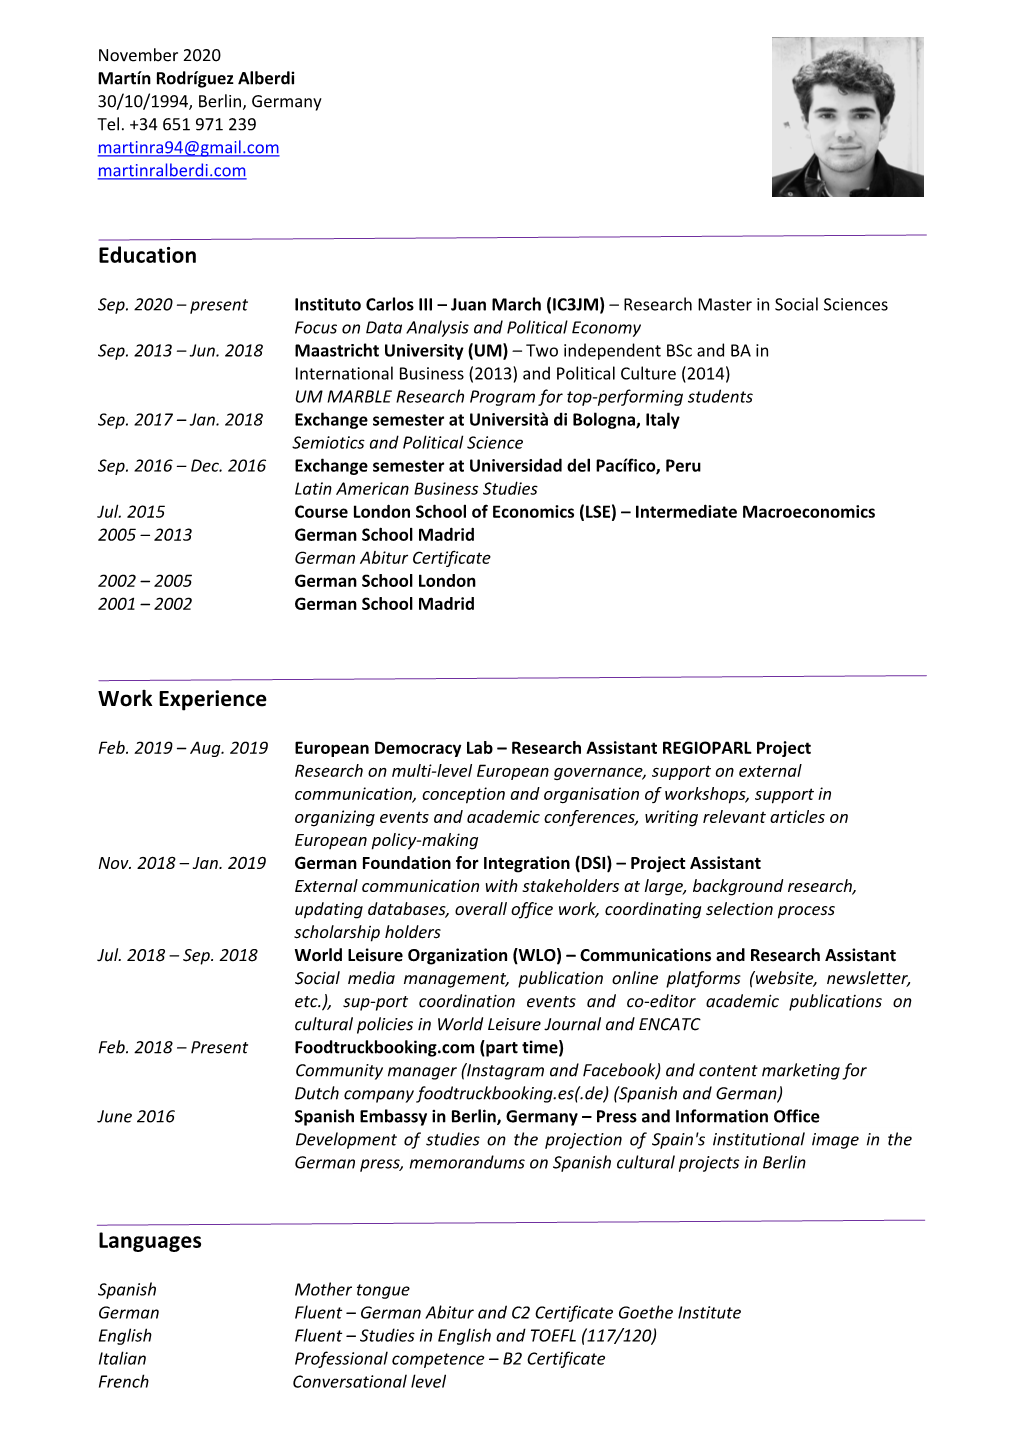 Education Work Experience Languages